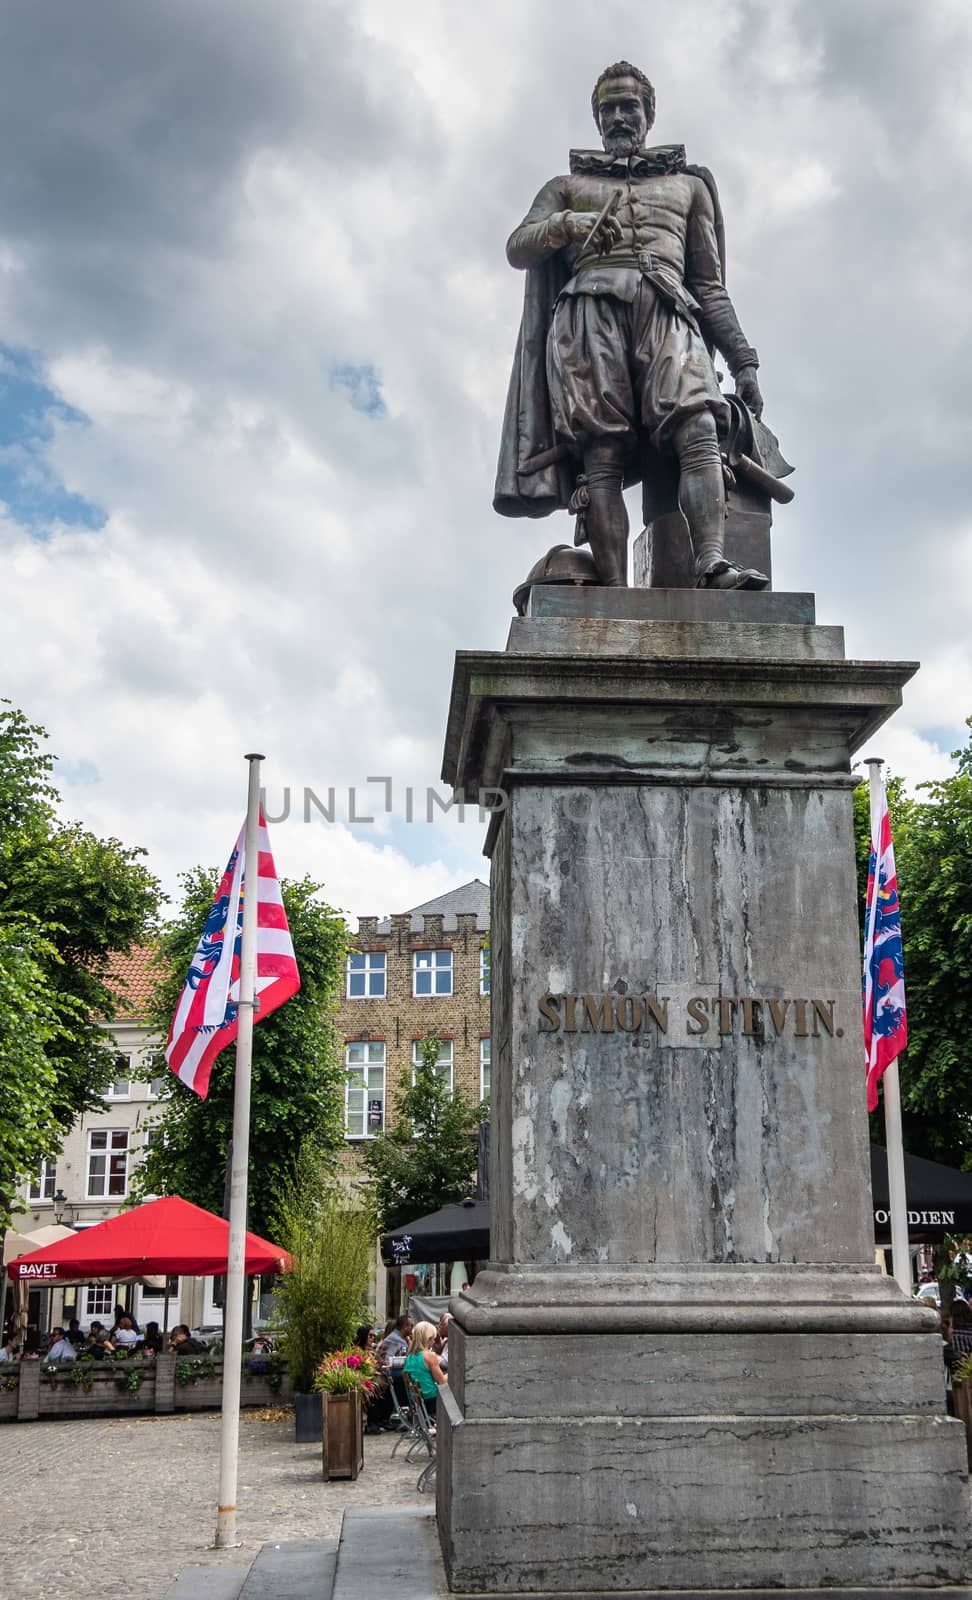 Bruges, Flanders, Belgium -  June 17, 2019: Simon Stevin statue on his own square where people enjoy drinks under cloudscape. Flags and green foliage.